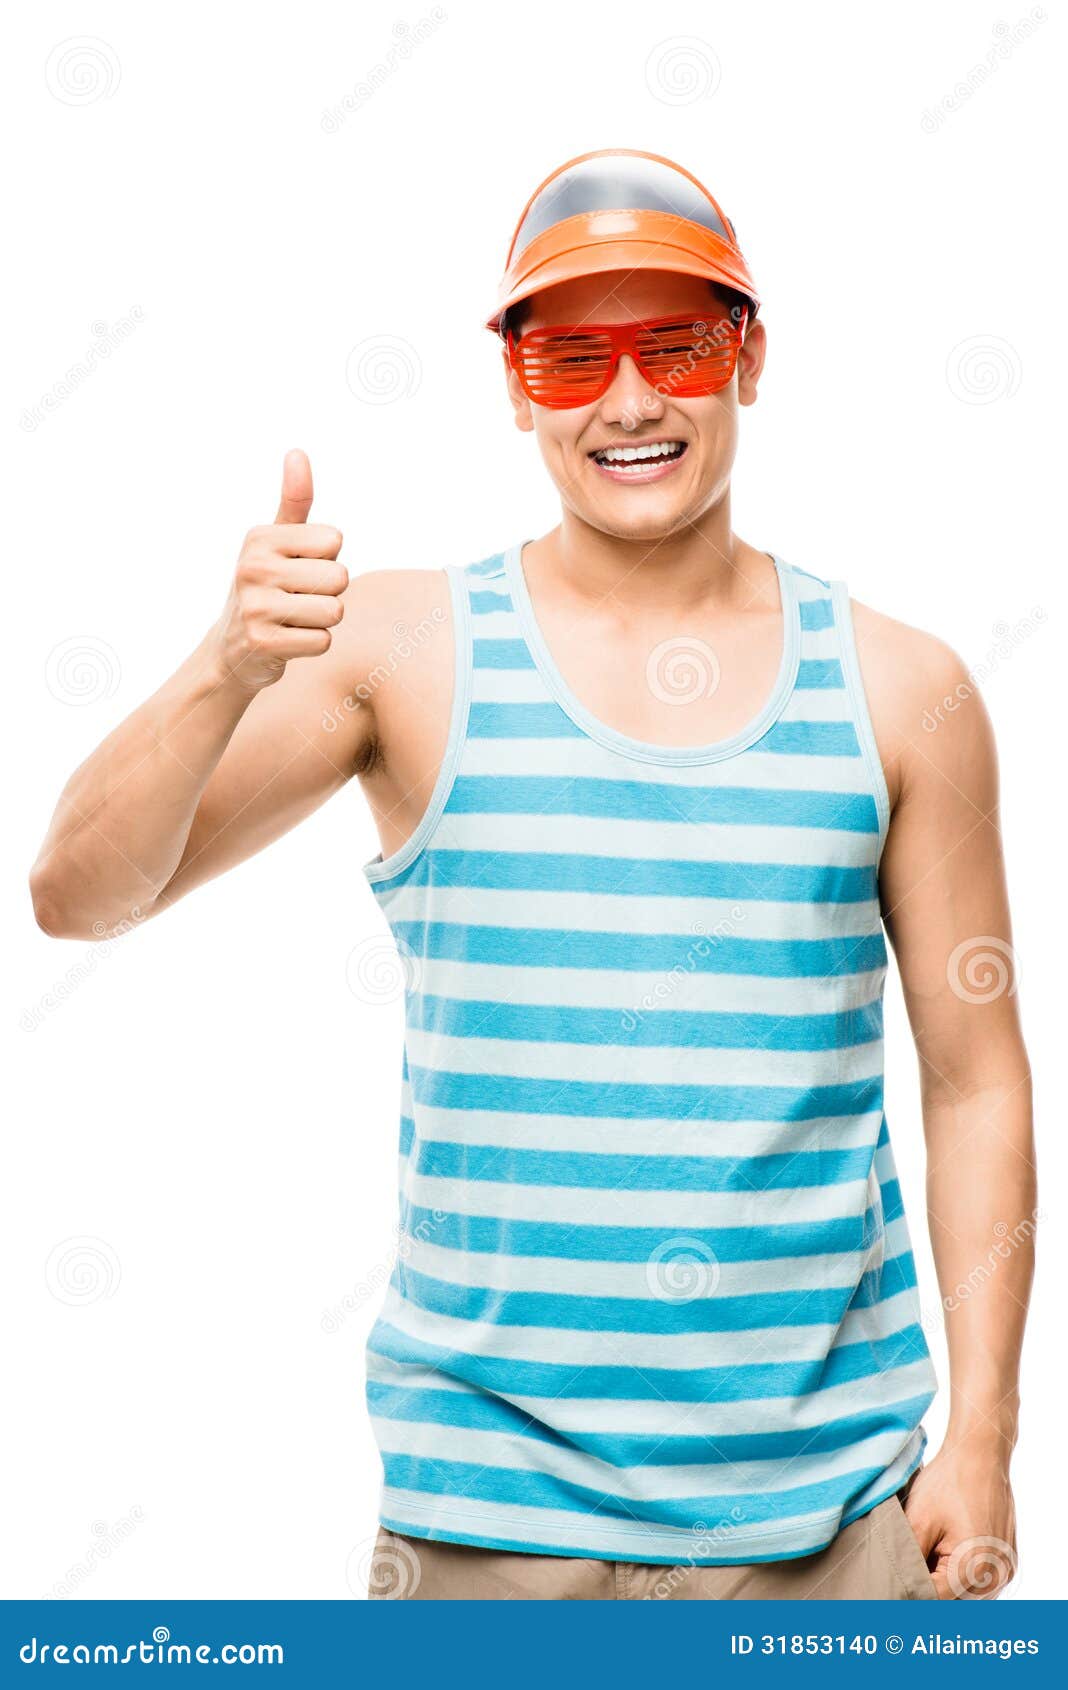 Geek Student Showing Thumbs Up Stock Photo - Image of length, happiness ...